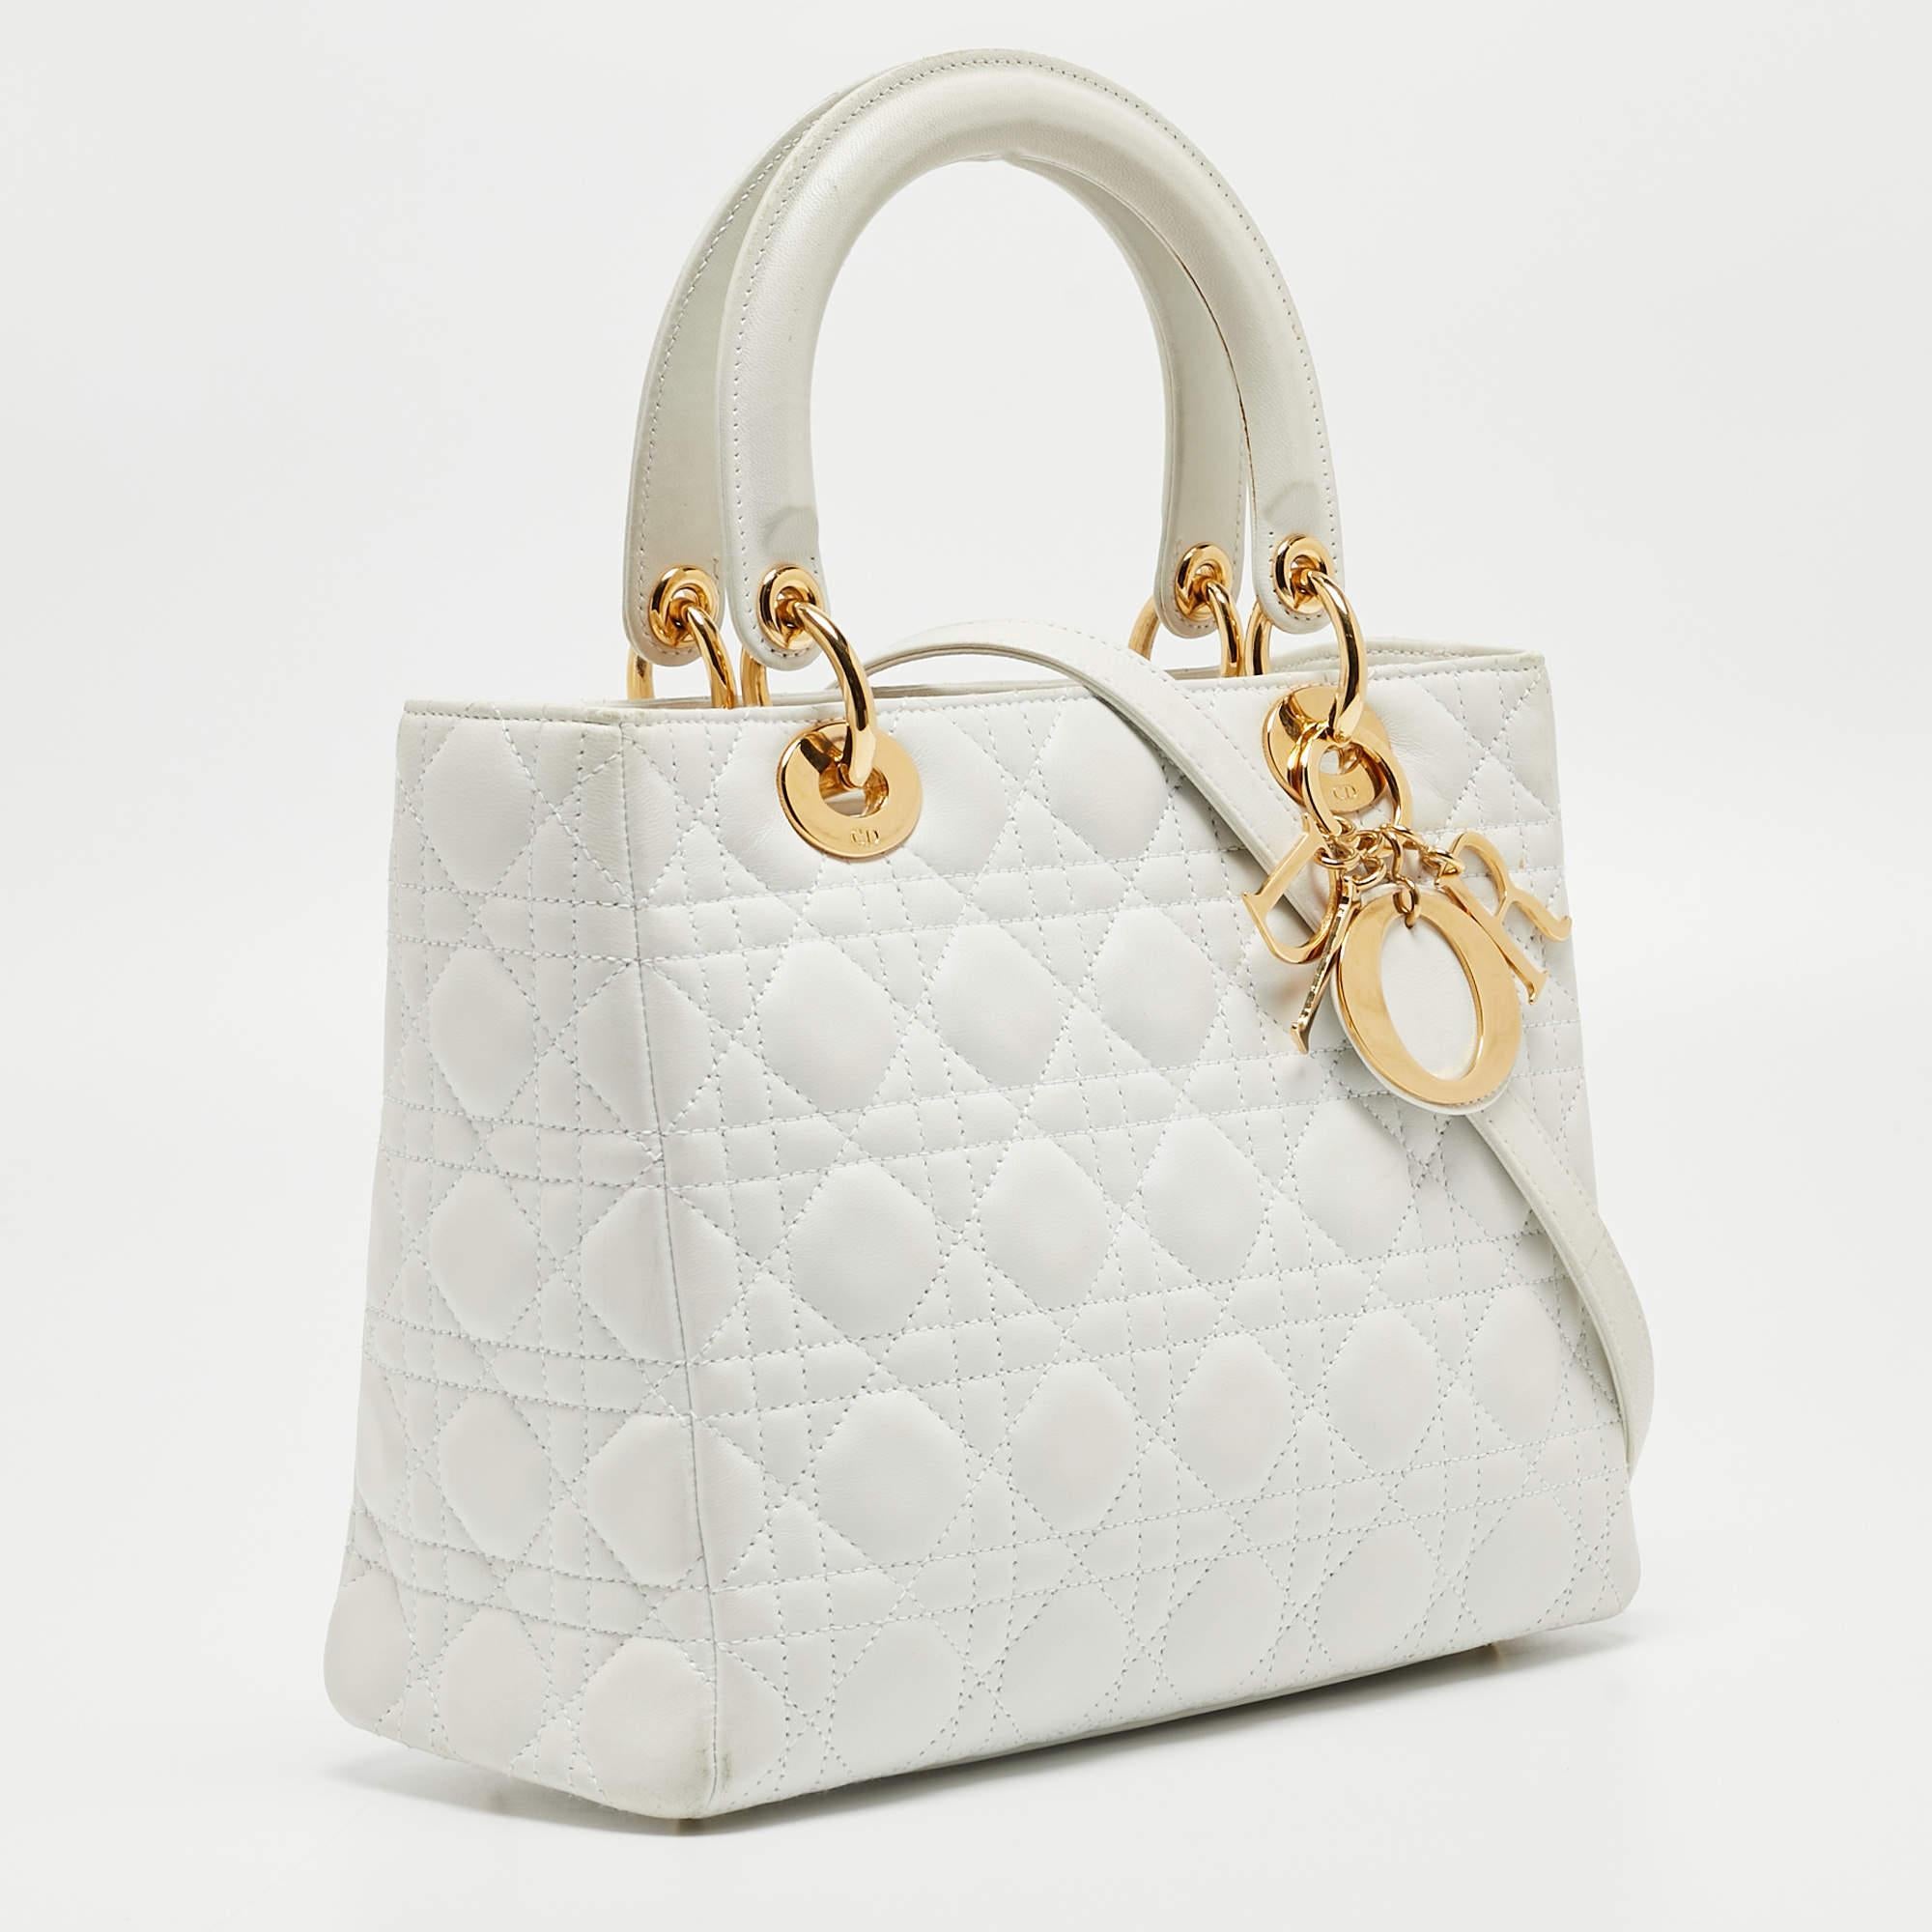 Due to detailed and innovative designs, Dior has managed to be at the top of fashion's hierarchy through the years. Infuse the signature aesthetics of the brand into your outfit by accessorizing it with this Lady Dior tote. With a classic design, it